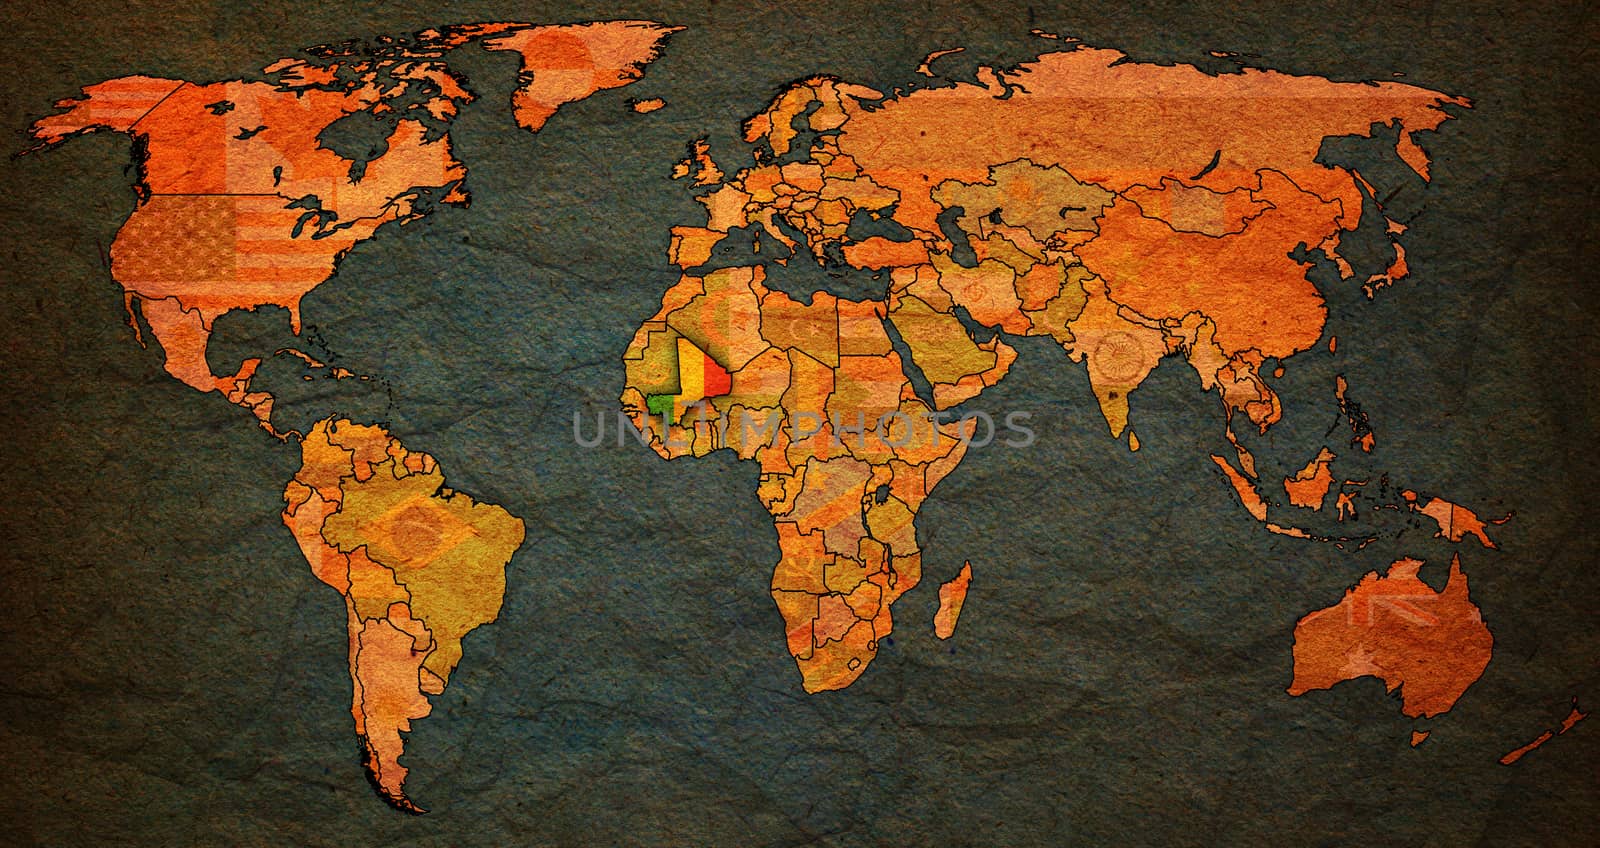 mali flag on old vintage world map with national borders